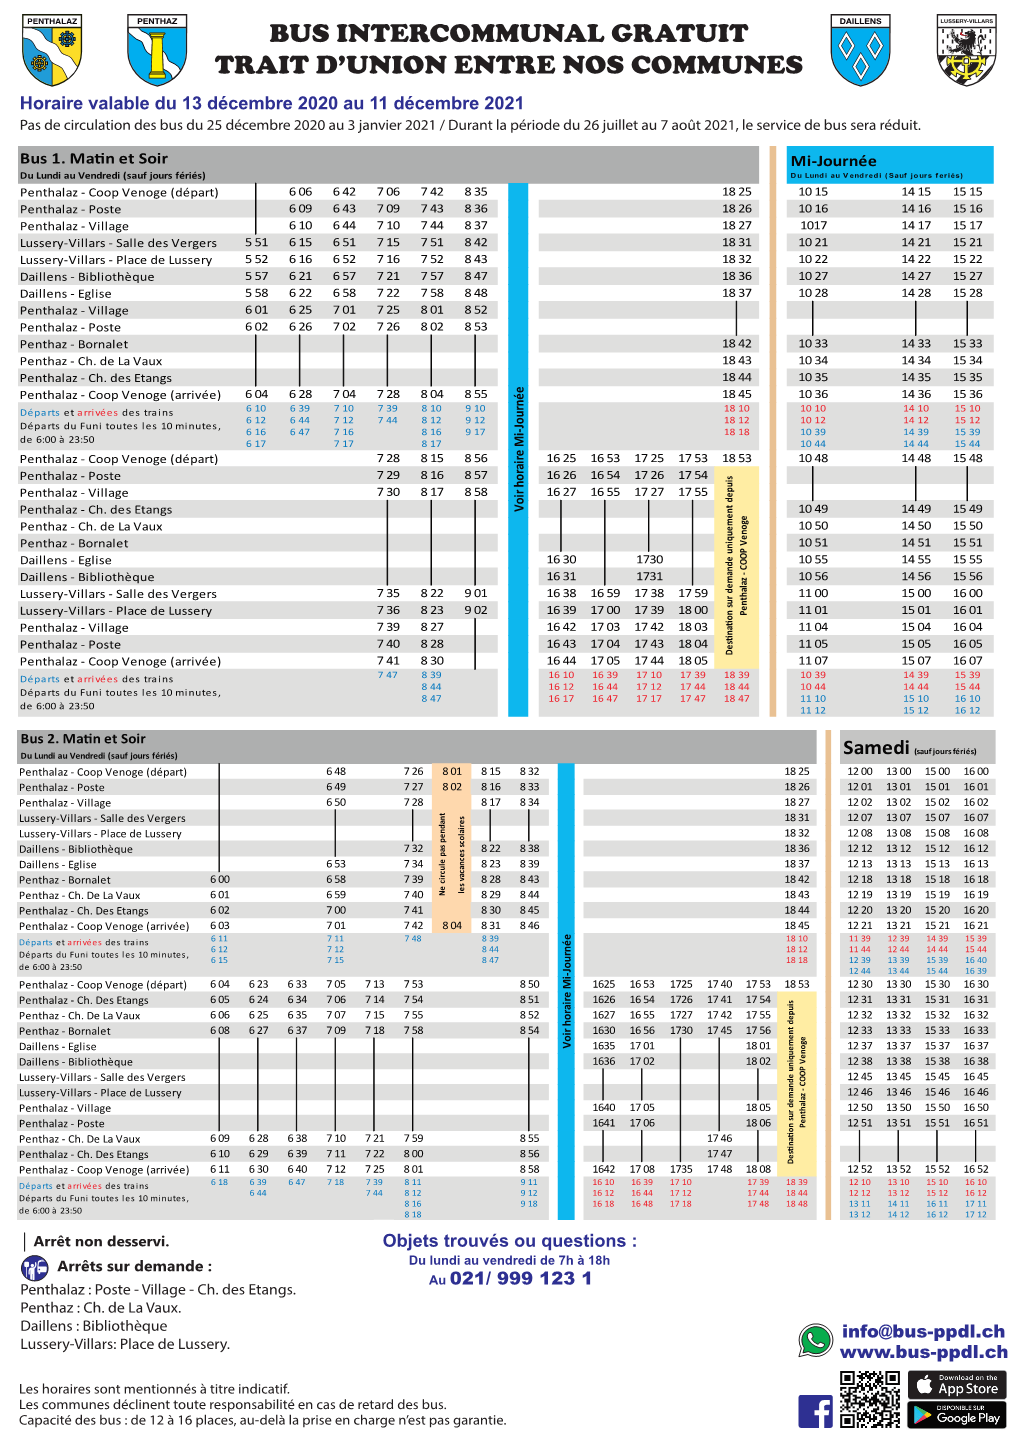 Horaire Bus PPDLV 2020-2021